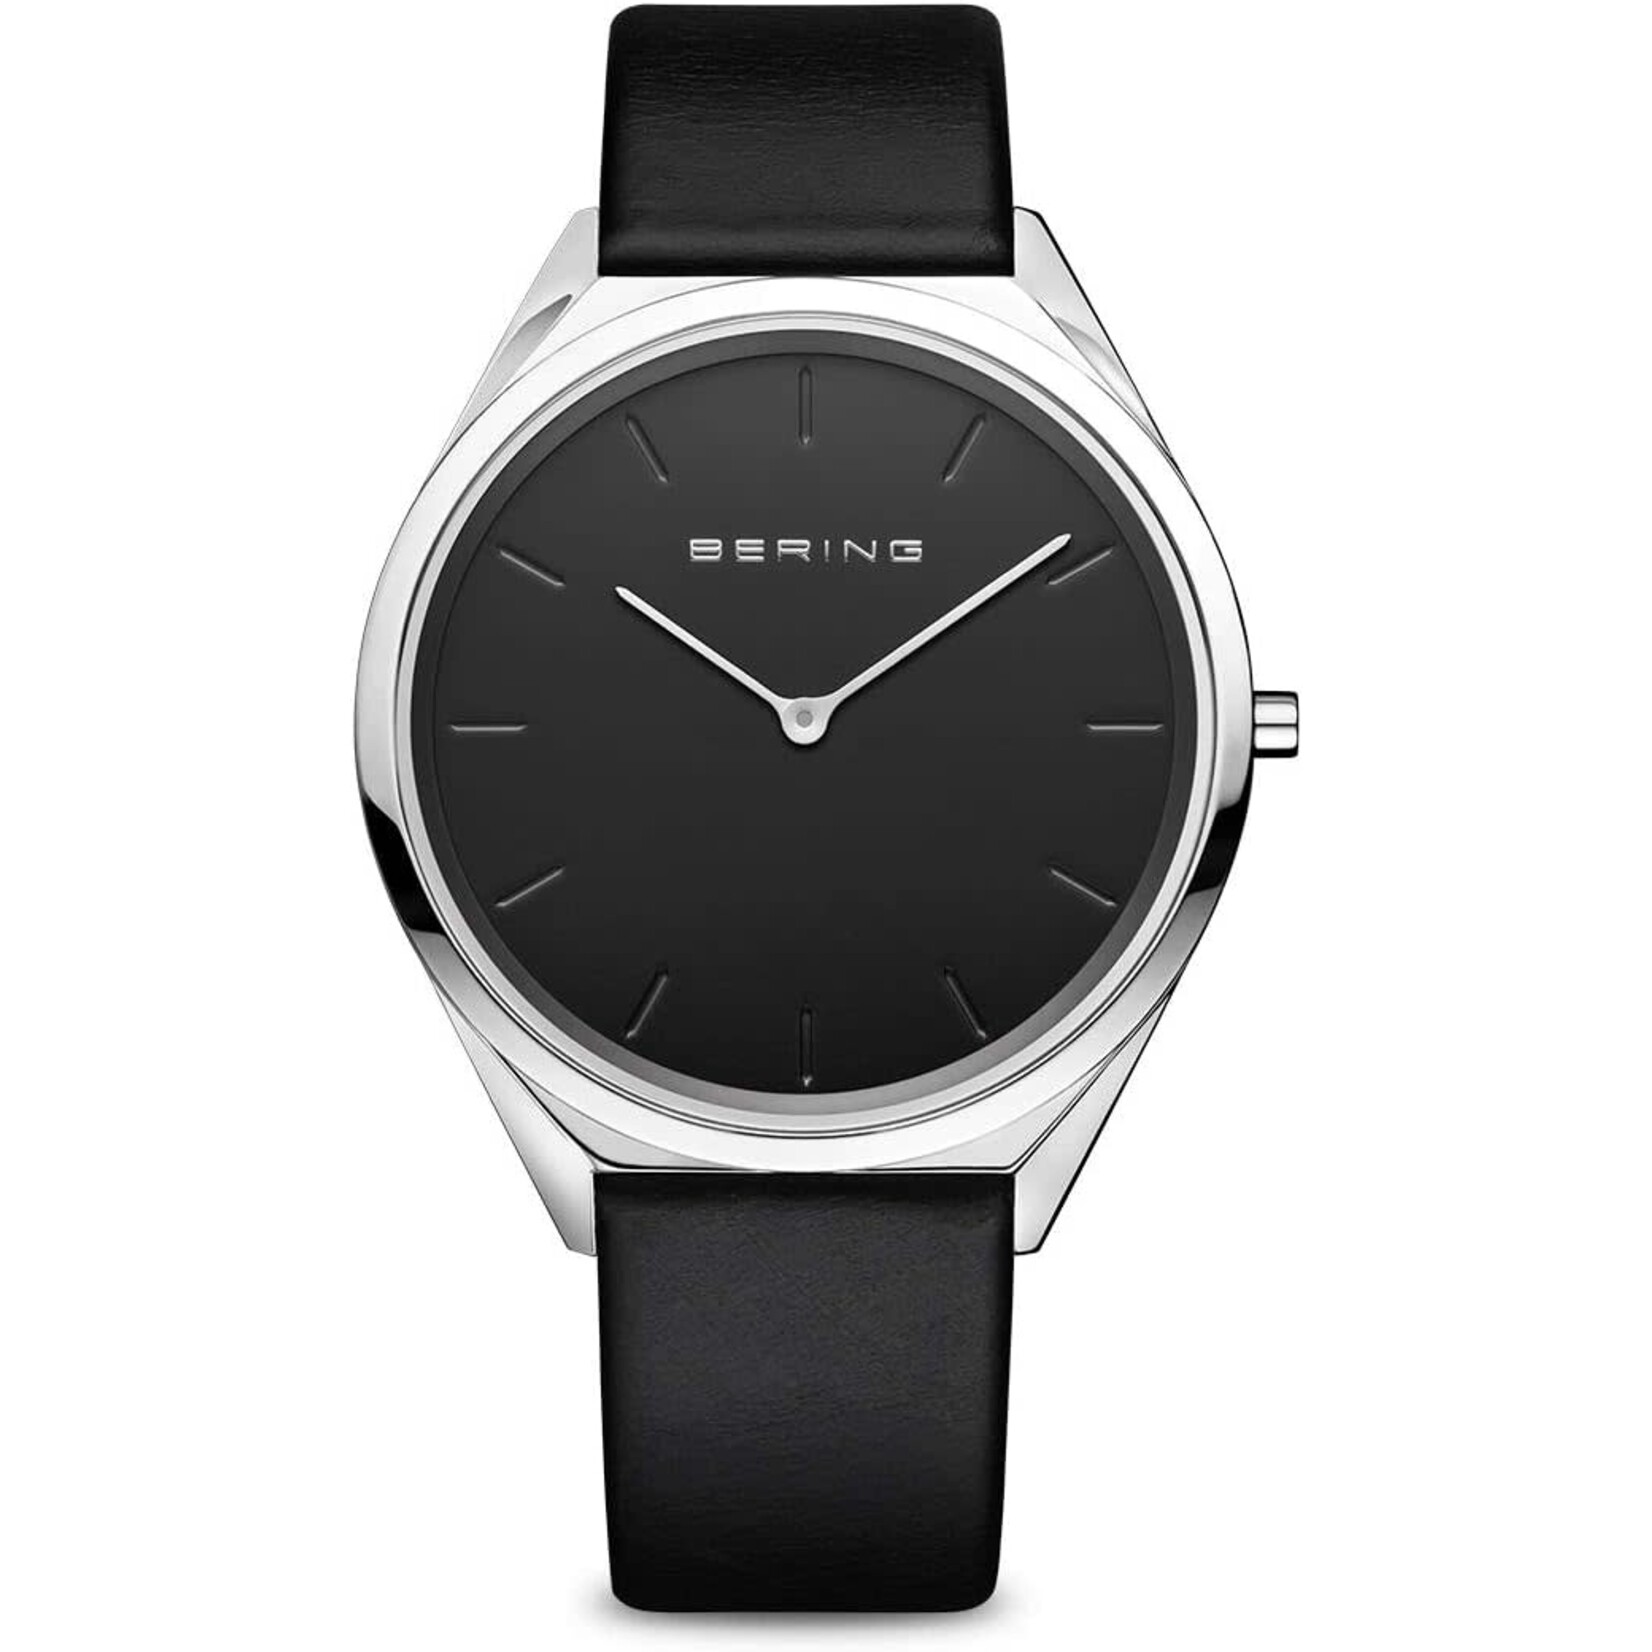 Bering Black Leather Dark Grey Face with Silver Watch